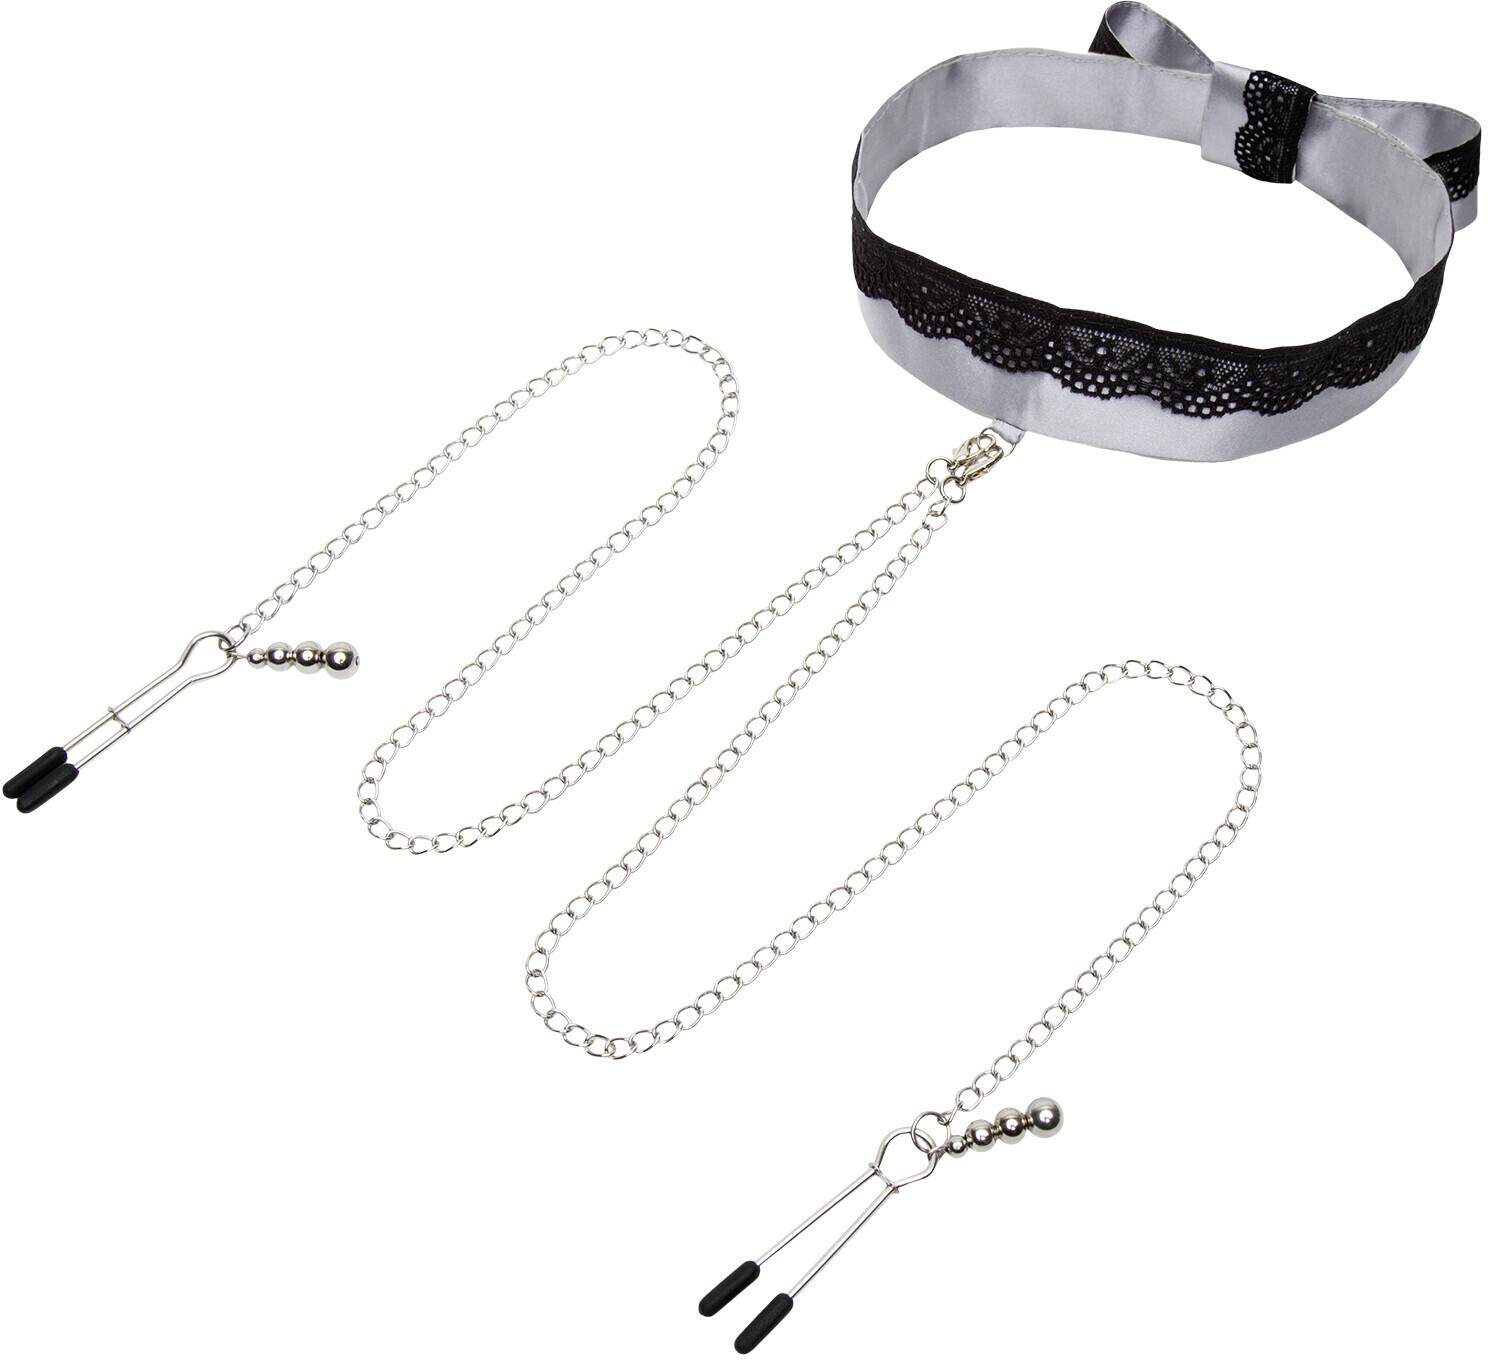 Fifty Shades of Grey Satin collar with nipple clamps au meilleur prix sur